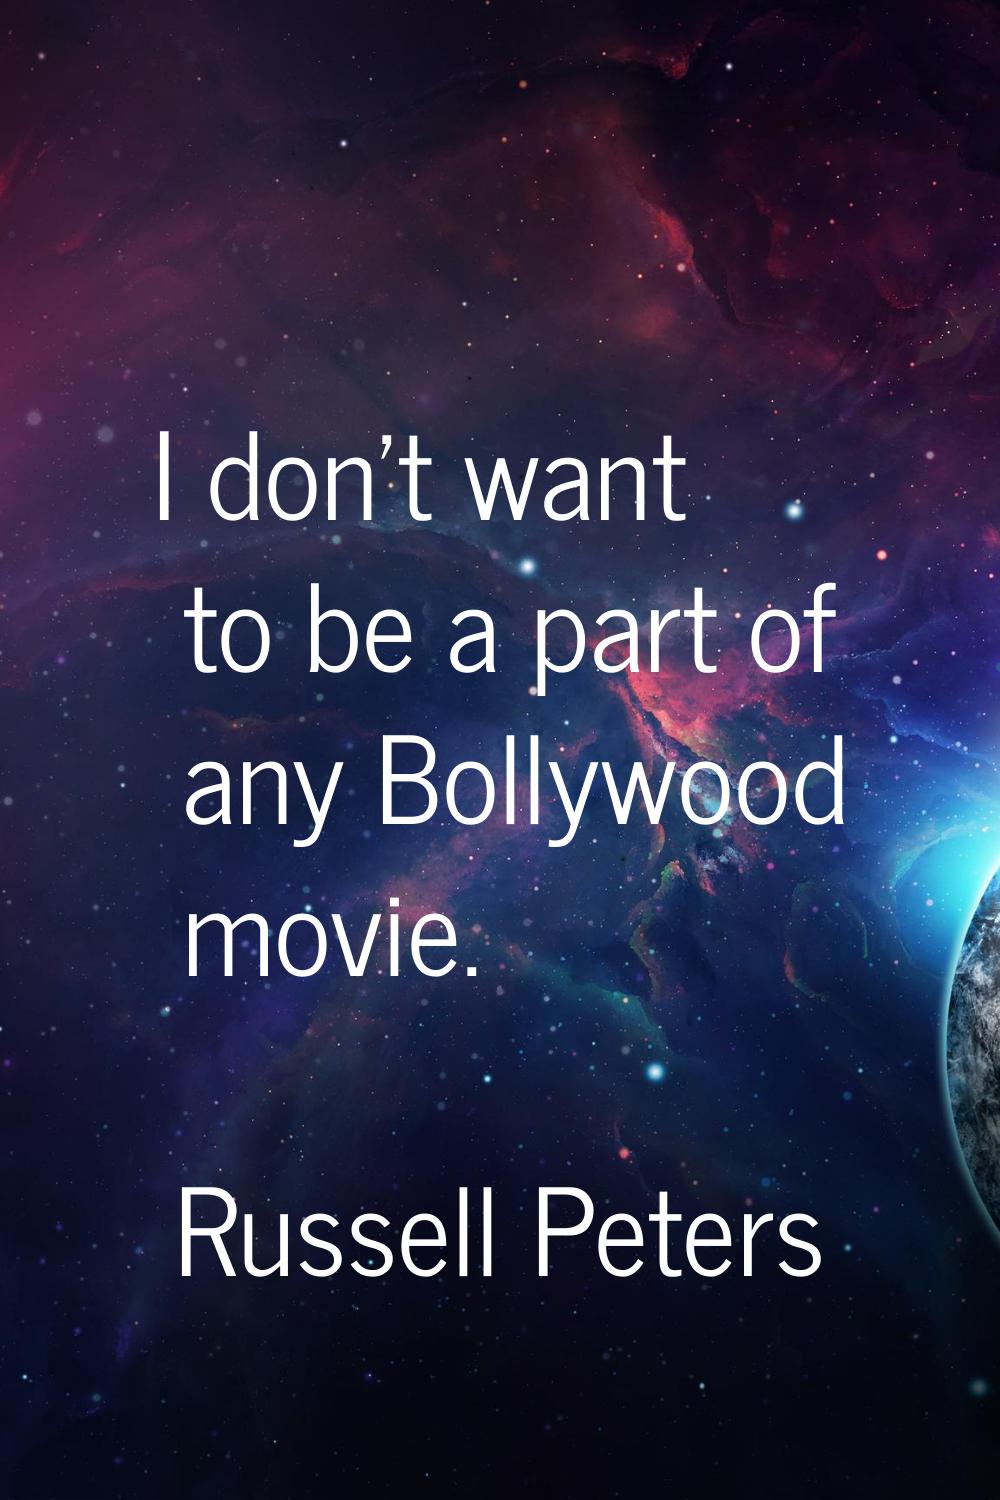 I don't want to be a part of any Bollywood movie.